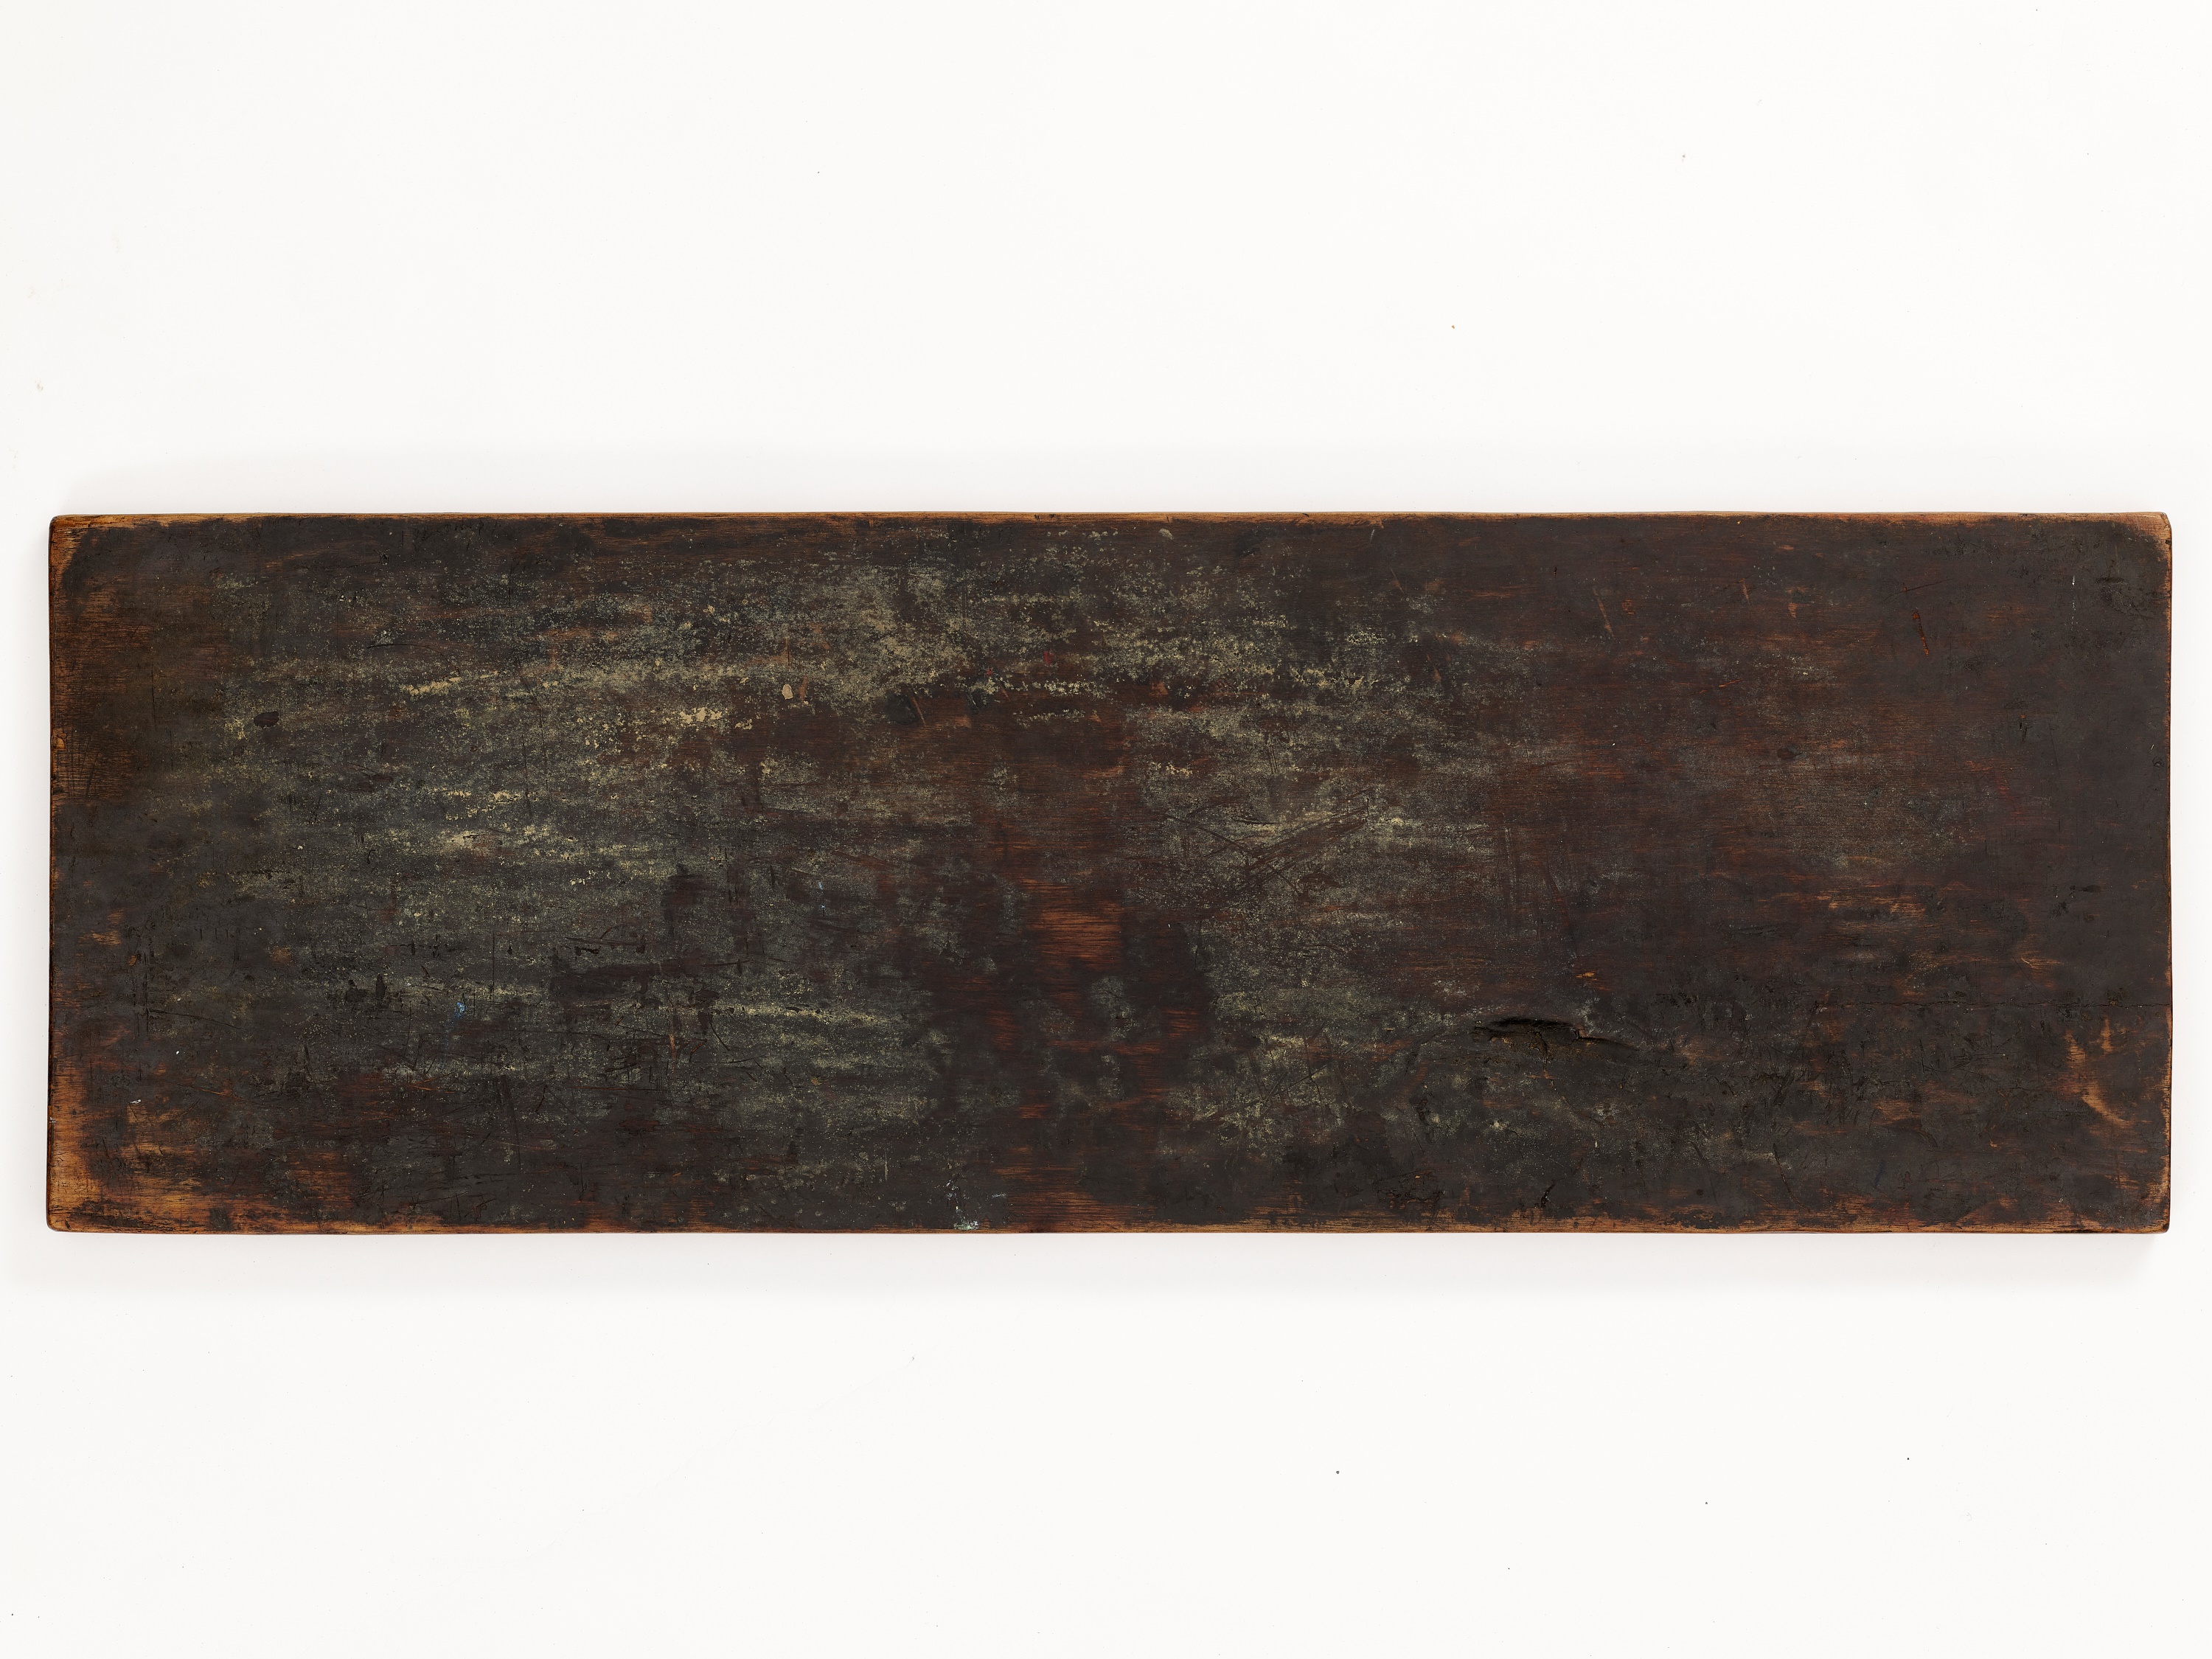 A RARE AND VERY LARGE PAINTED WOOD SUTRA COVER, NEPAL, CIRCA 1450 - Image 8 of 8